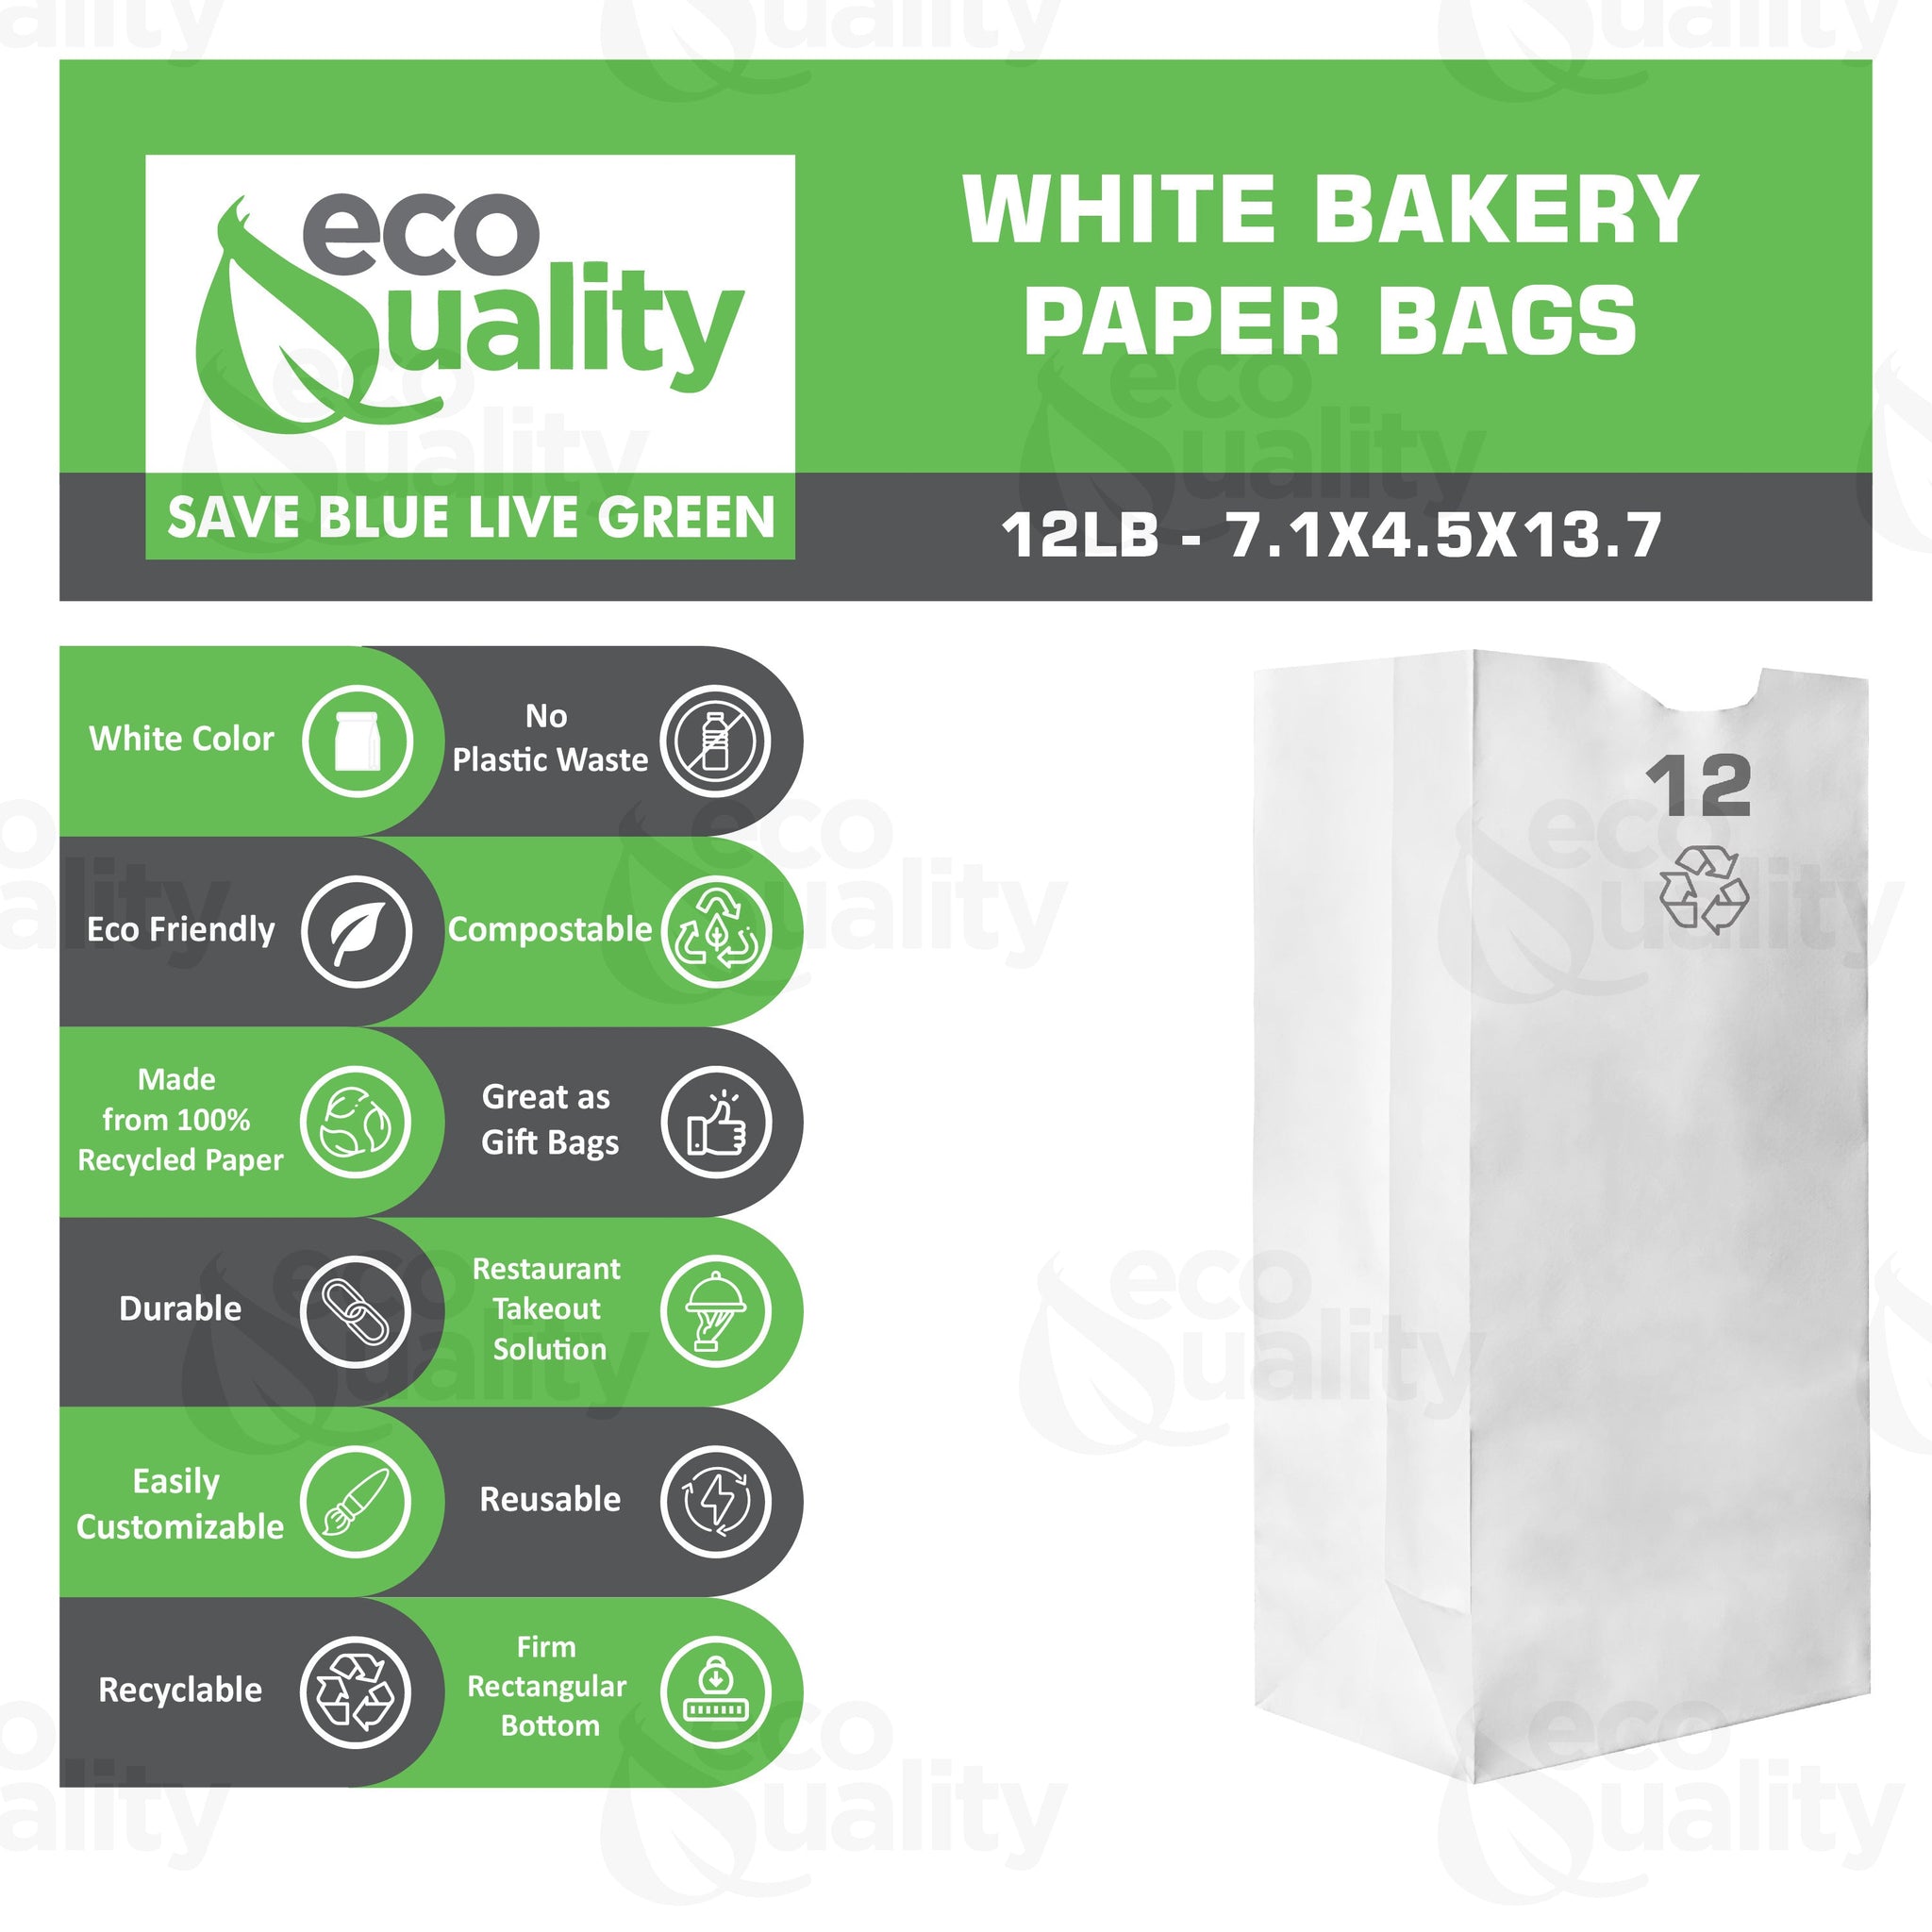 disposable bag White Paper Bags white Paper Shopping Bags foldable paper bag catering bags white kraft paper bag 1 pound candy bag snack bag gift bags DIY Bags arts and craft Sandwich Bag white paper bag party favor bag lunch bag togo bag takeout bag Restaurant supplies paper bakery bags Kraft Paper Bags kraft grocery bags supermarket Household Supplies hero bread tall long paper bag 12 pound